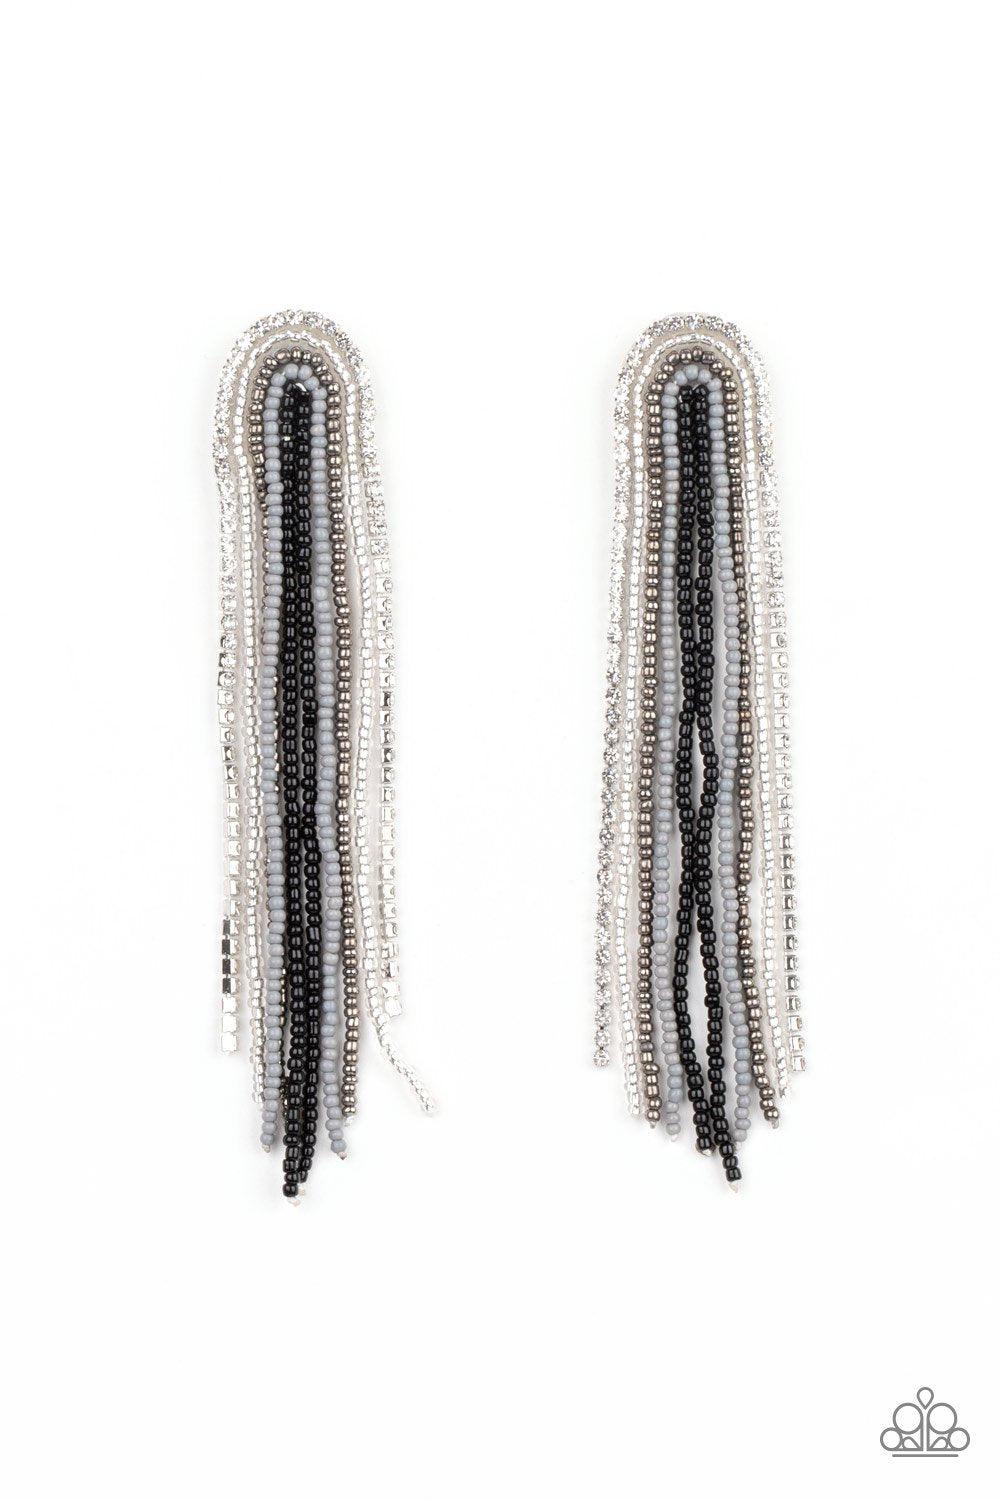 Let There BEAD Light Black and Silver Seed Bead and Rhinestone Earrings - Paparazzi Accessories - lightbox -CarasShop.com - $5 Jewelry by Cara Jewels